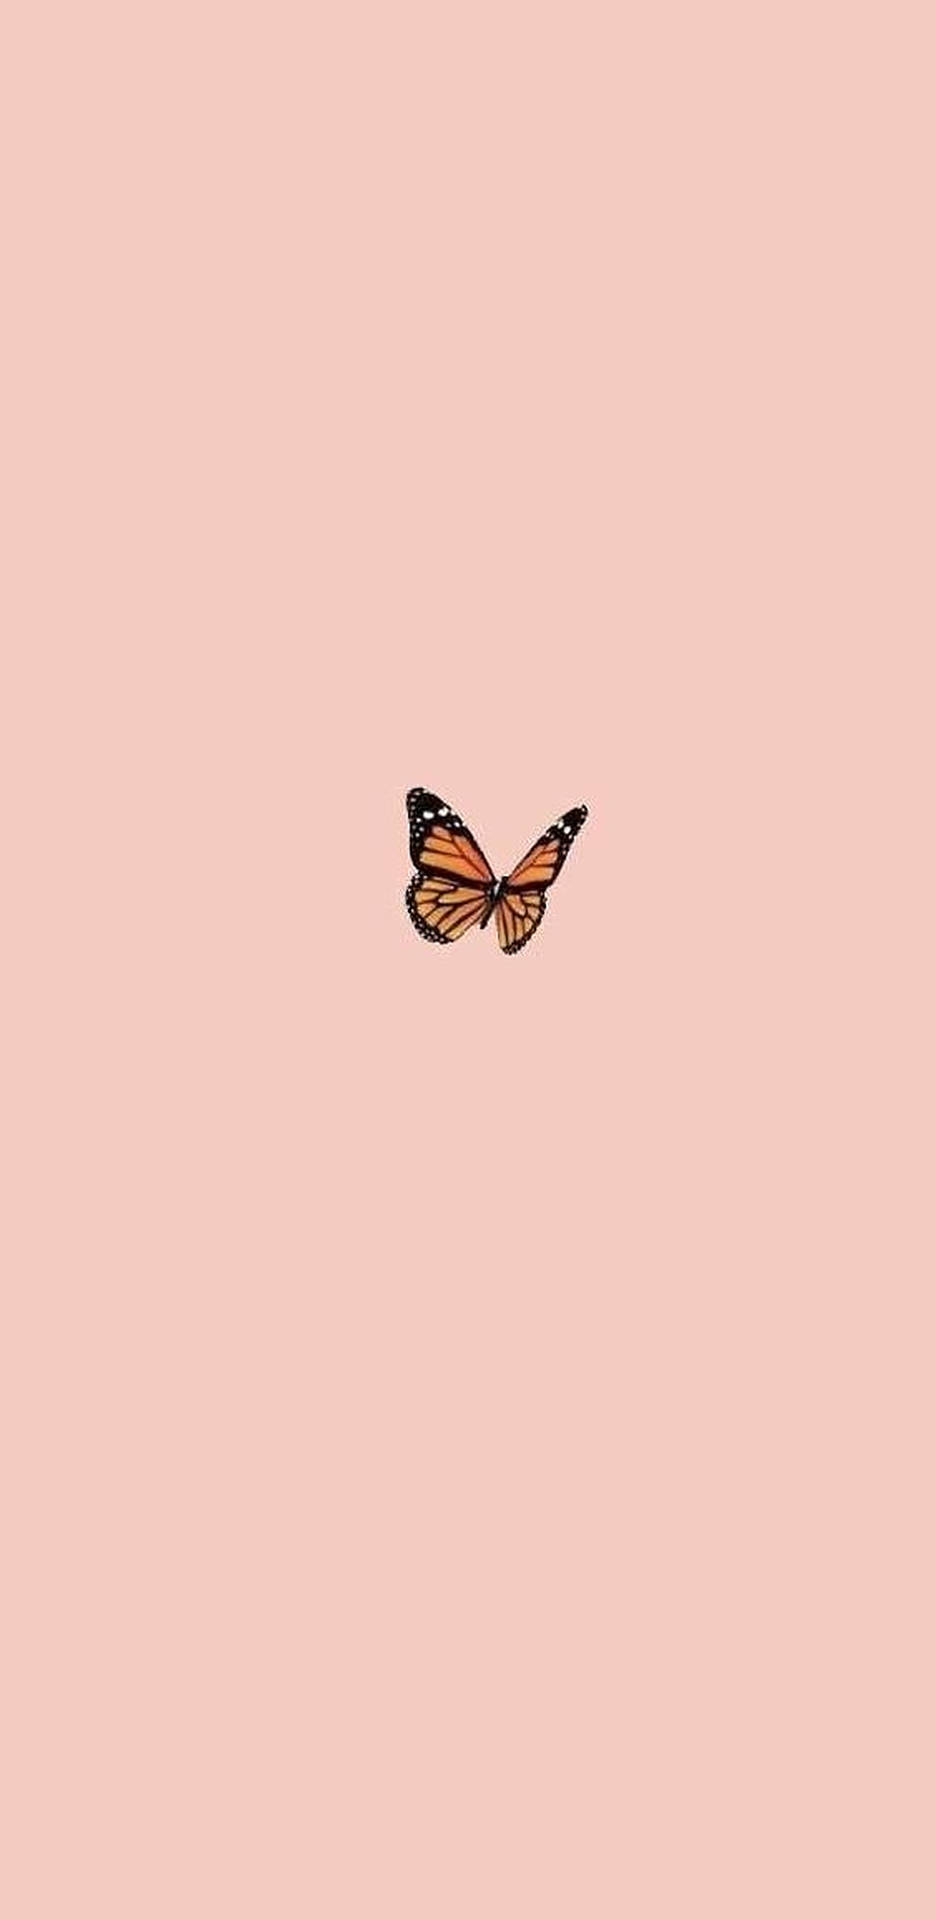 Iphone Aesthetic Butterfly Wallpaper